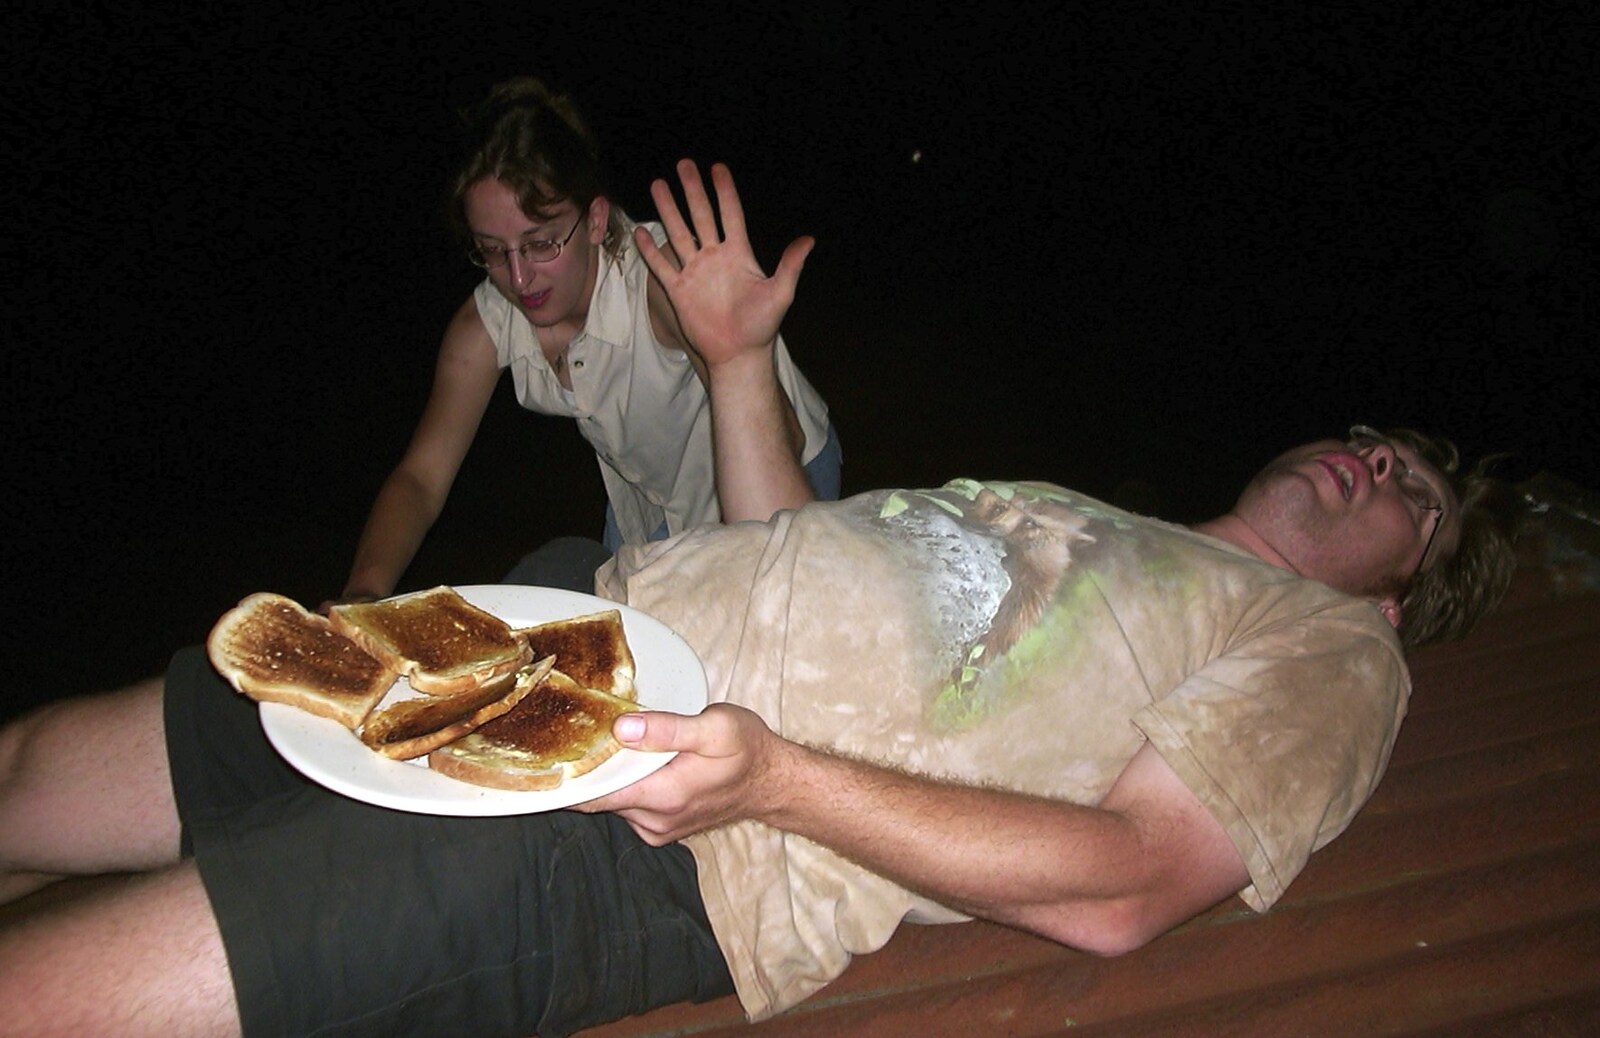 Marc flakes out with a plate of toast from Weird Dudes on Shed and a Lost Weekend, Brome - 23rd August 2003